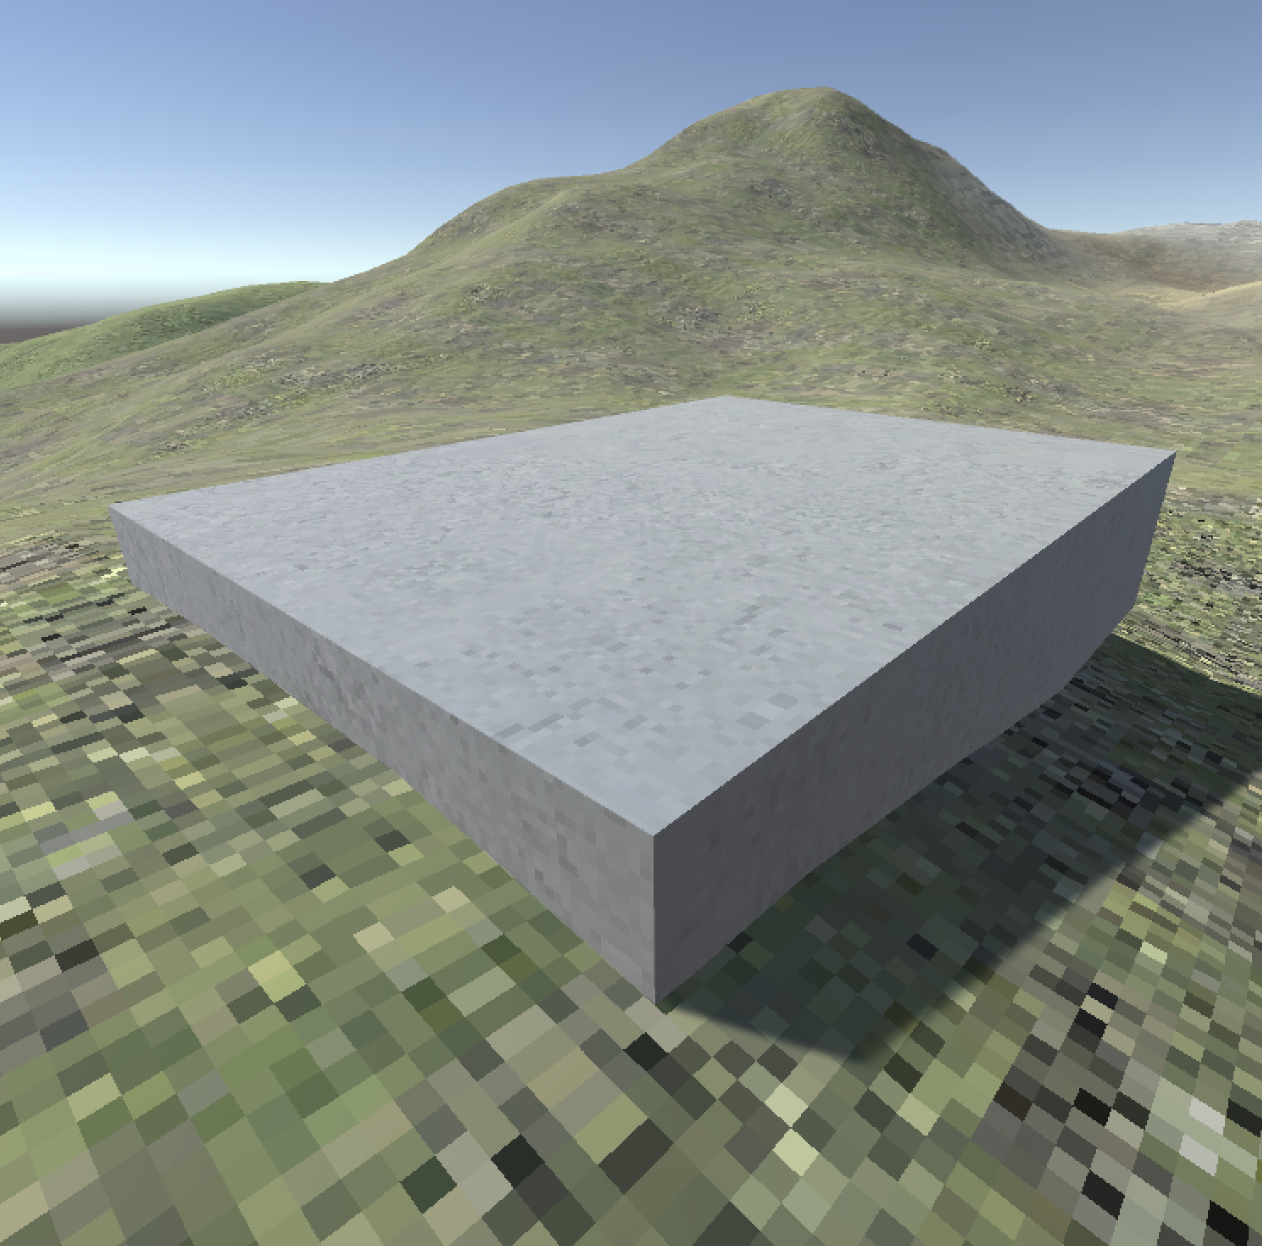 View of the different sized pixels in the terrain versus the concrete